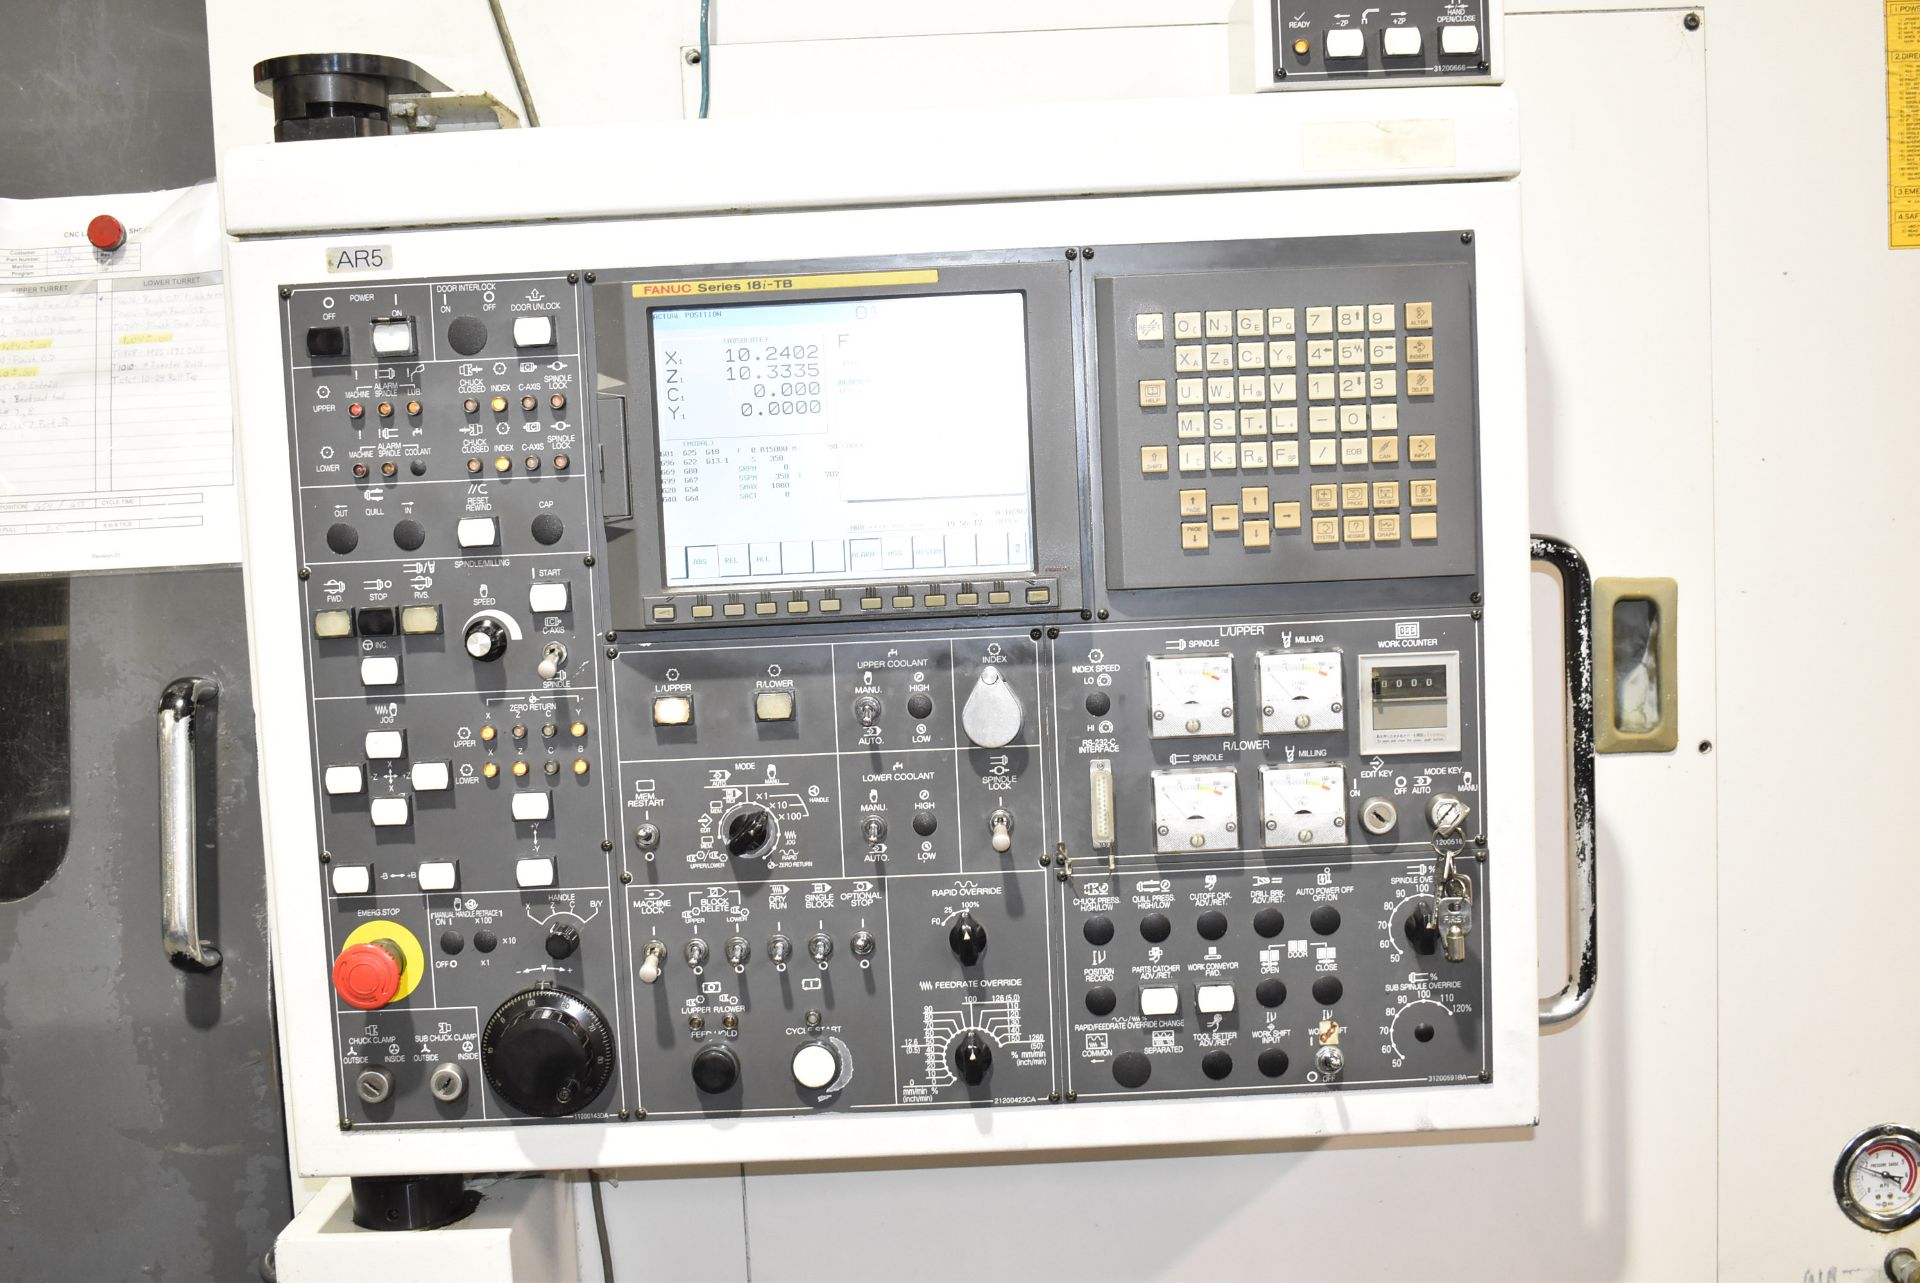 NAKAMURA-TOME WT-250 MULTI-AXIS OPPOSED SPINDLE AND TWIN TURRET CNC MULTI-TASKING CENTER WITH - Image 8 of 9